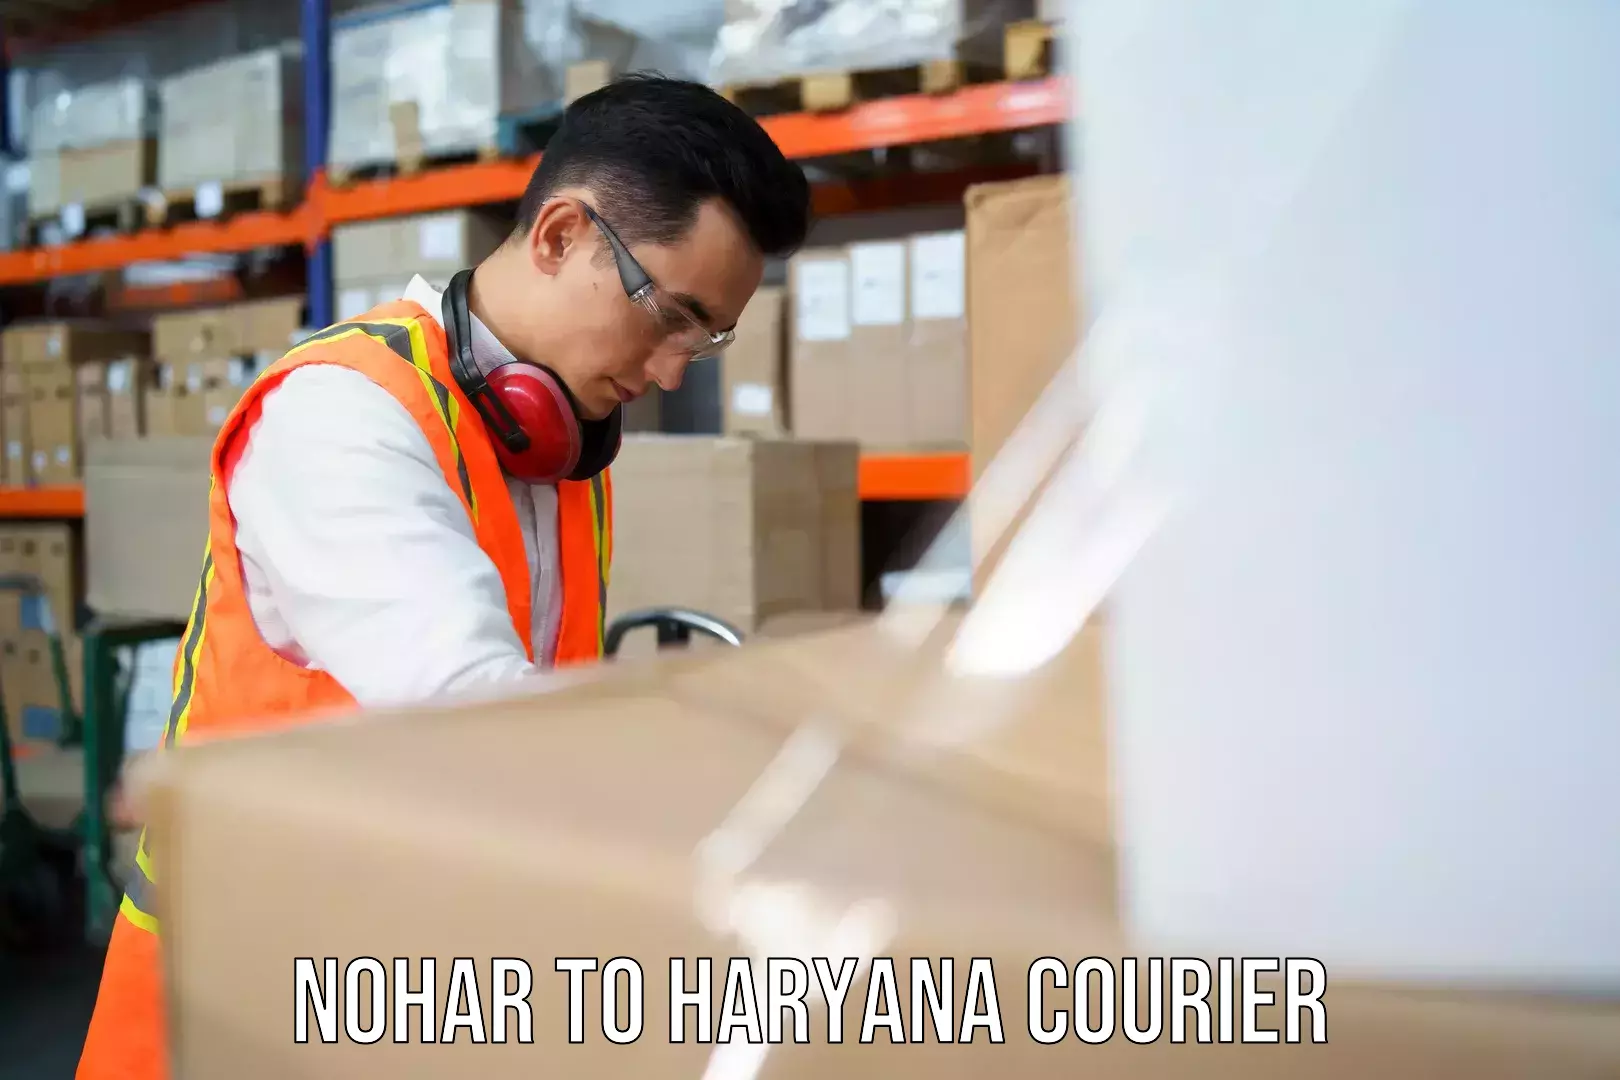 Courier service partnerships in Nohar to Rohtak